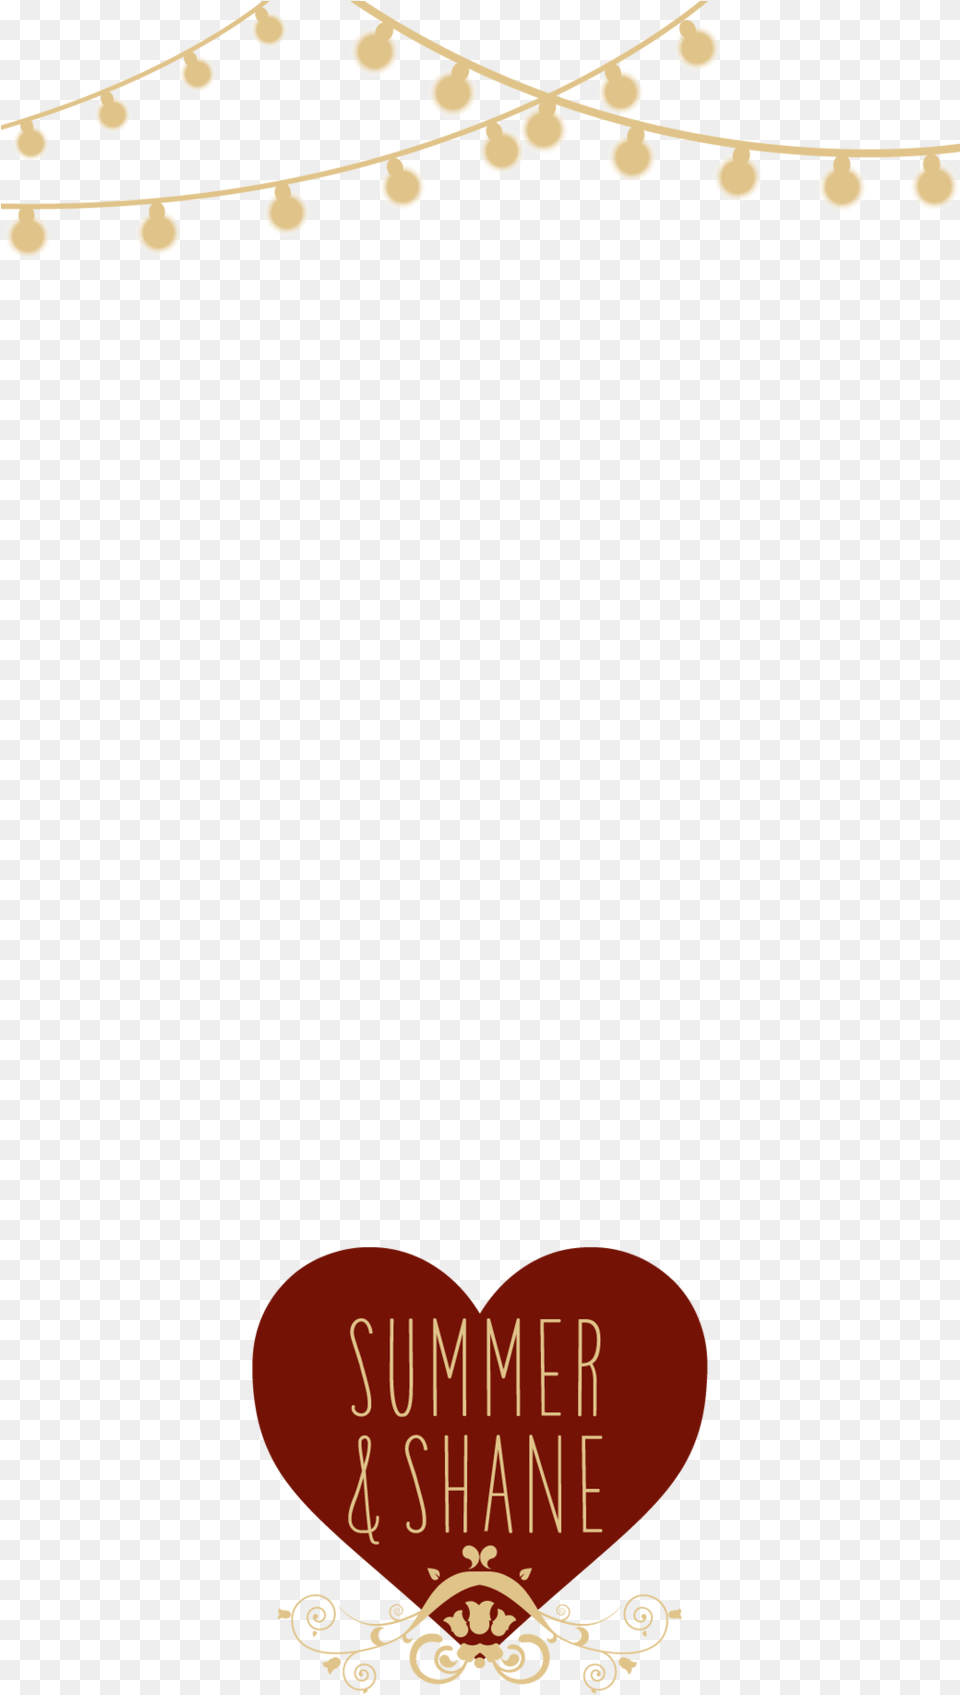 Snapchat Geofilter, Accessories, Jewelry, Necklace Png